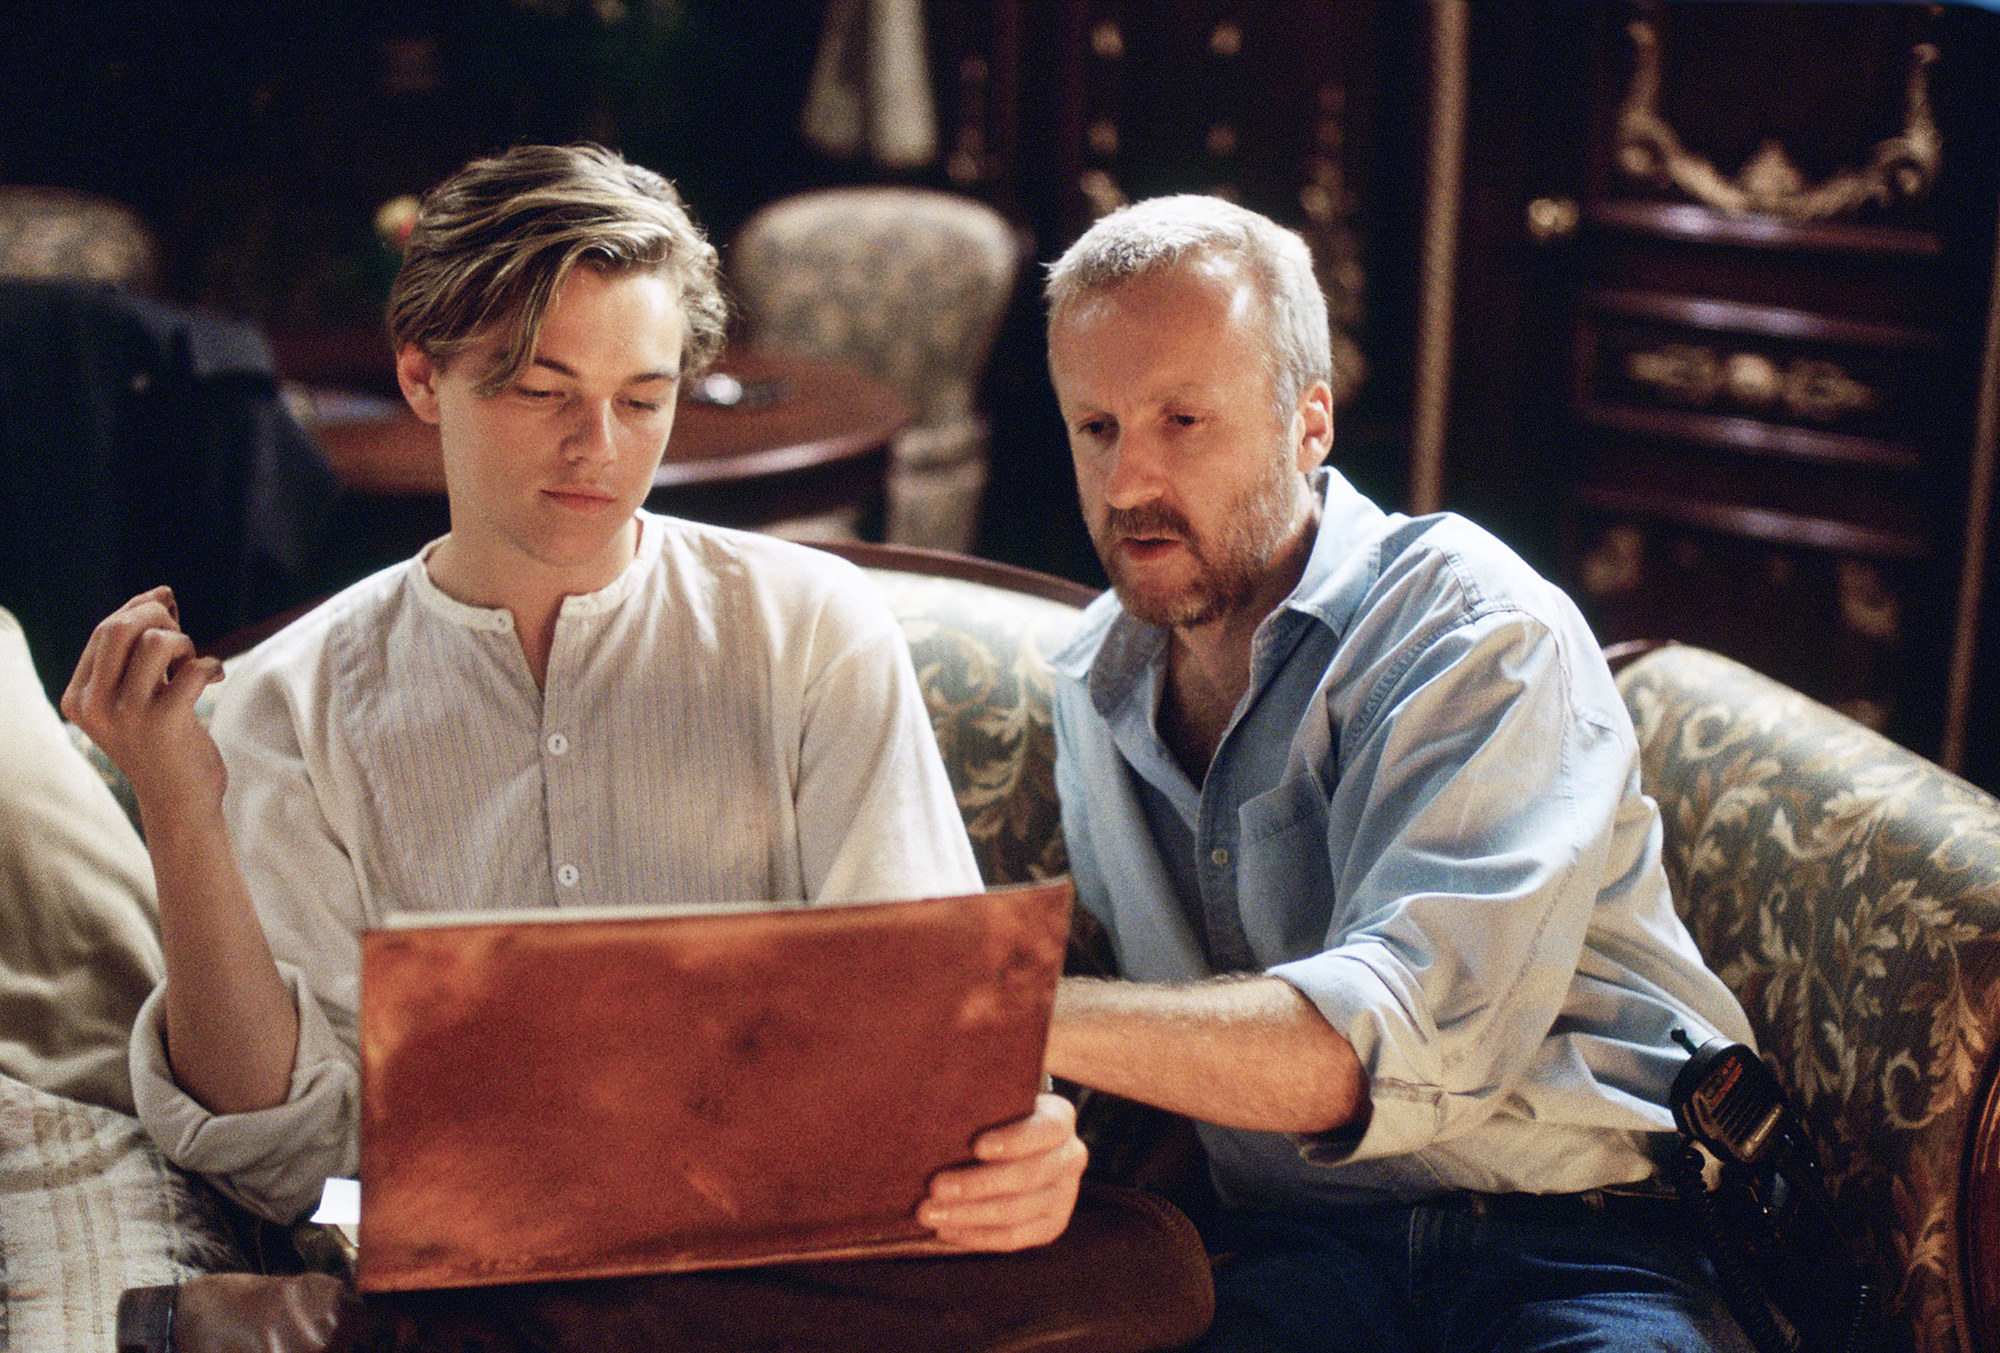  DiCaprio and Cameron sitting on a sofa looking at a book 